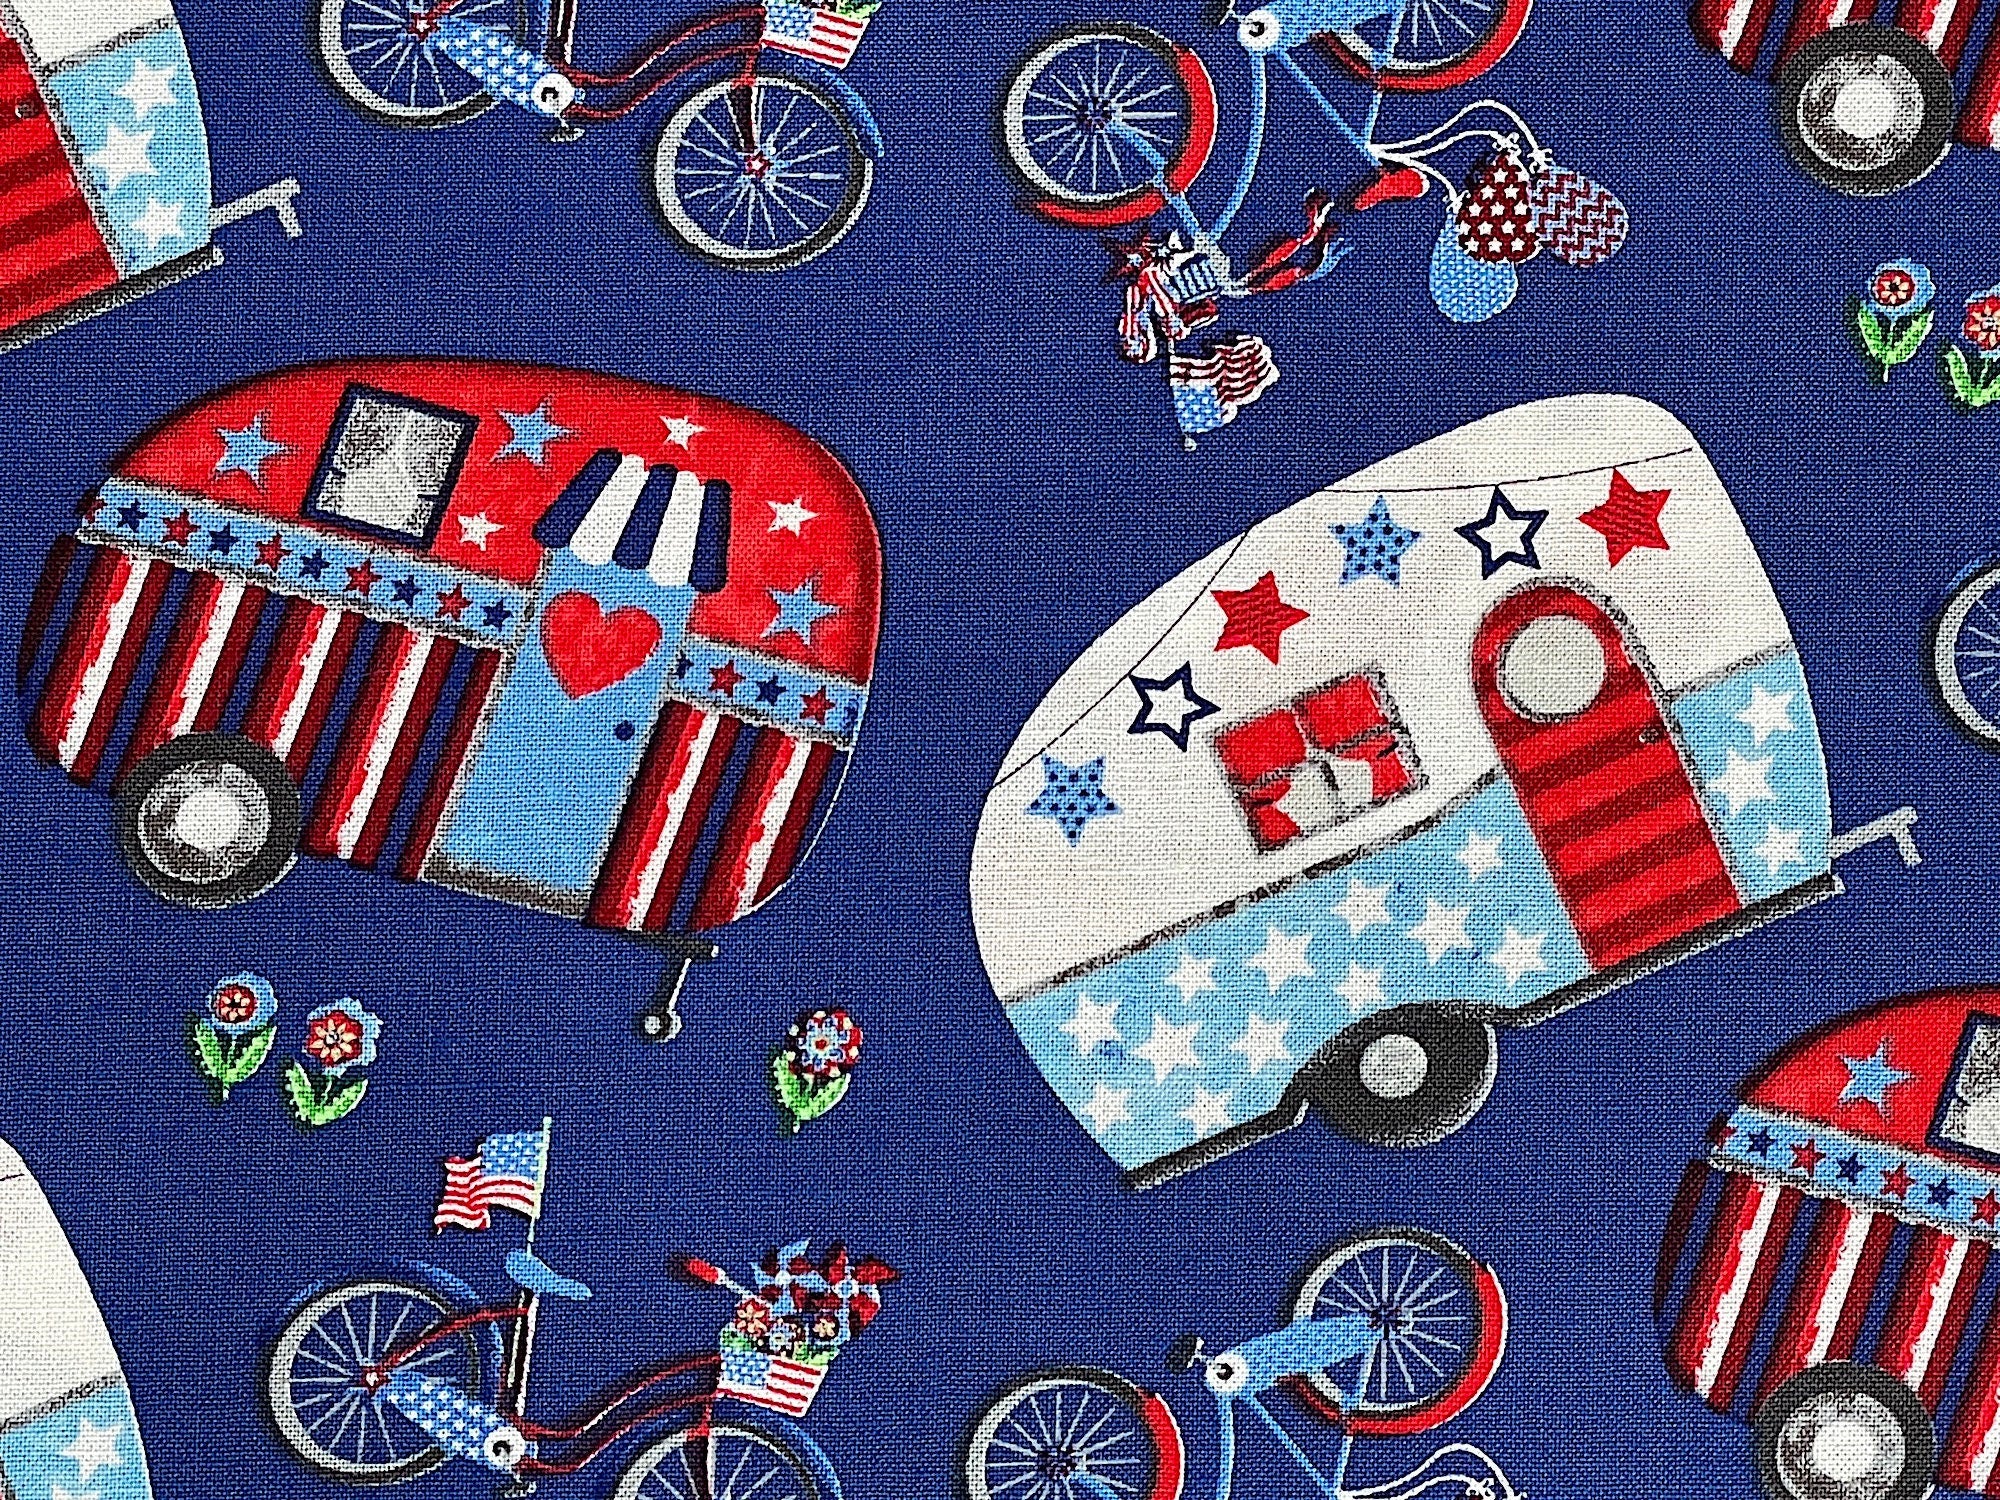 Blue cotton fabric covered with red white and blue travel trailers and bicycles.